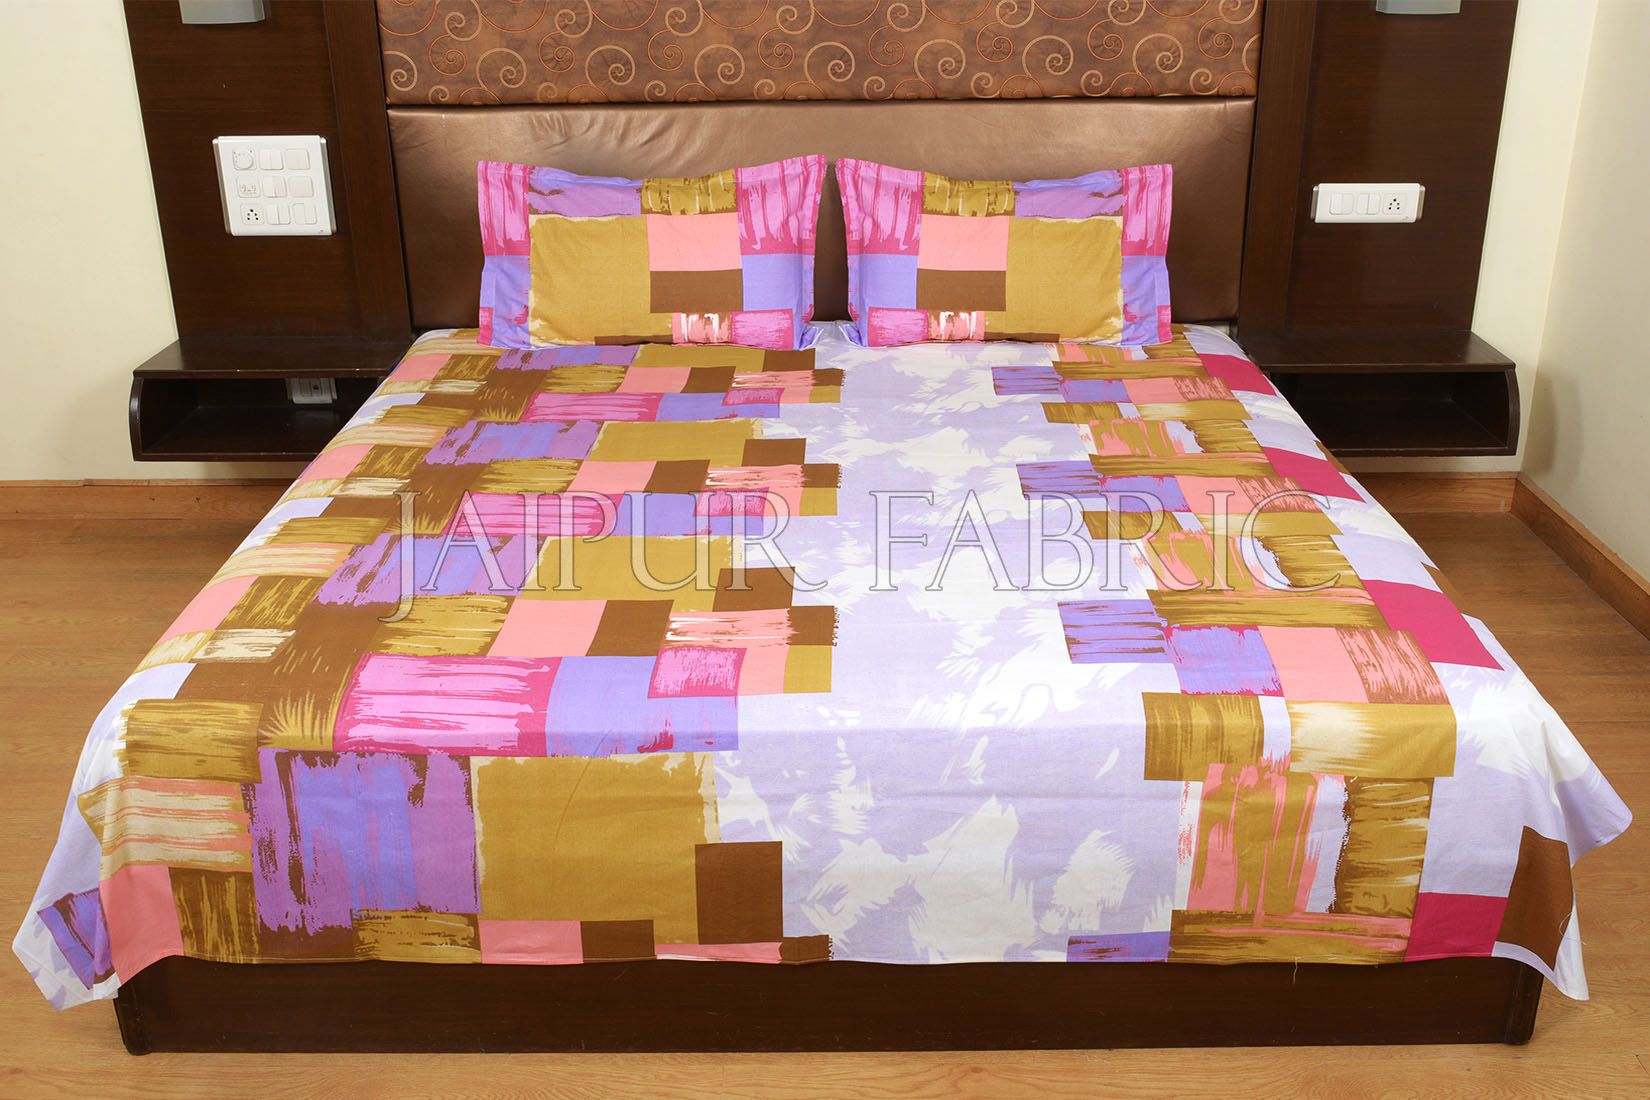 Purple and Pink Modern Design Cotton Double Bed Sheet